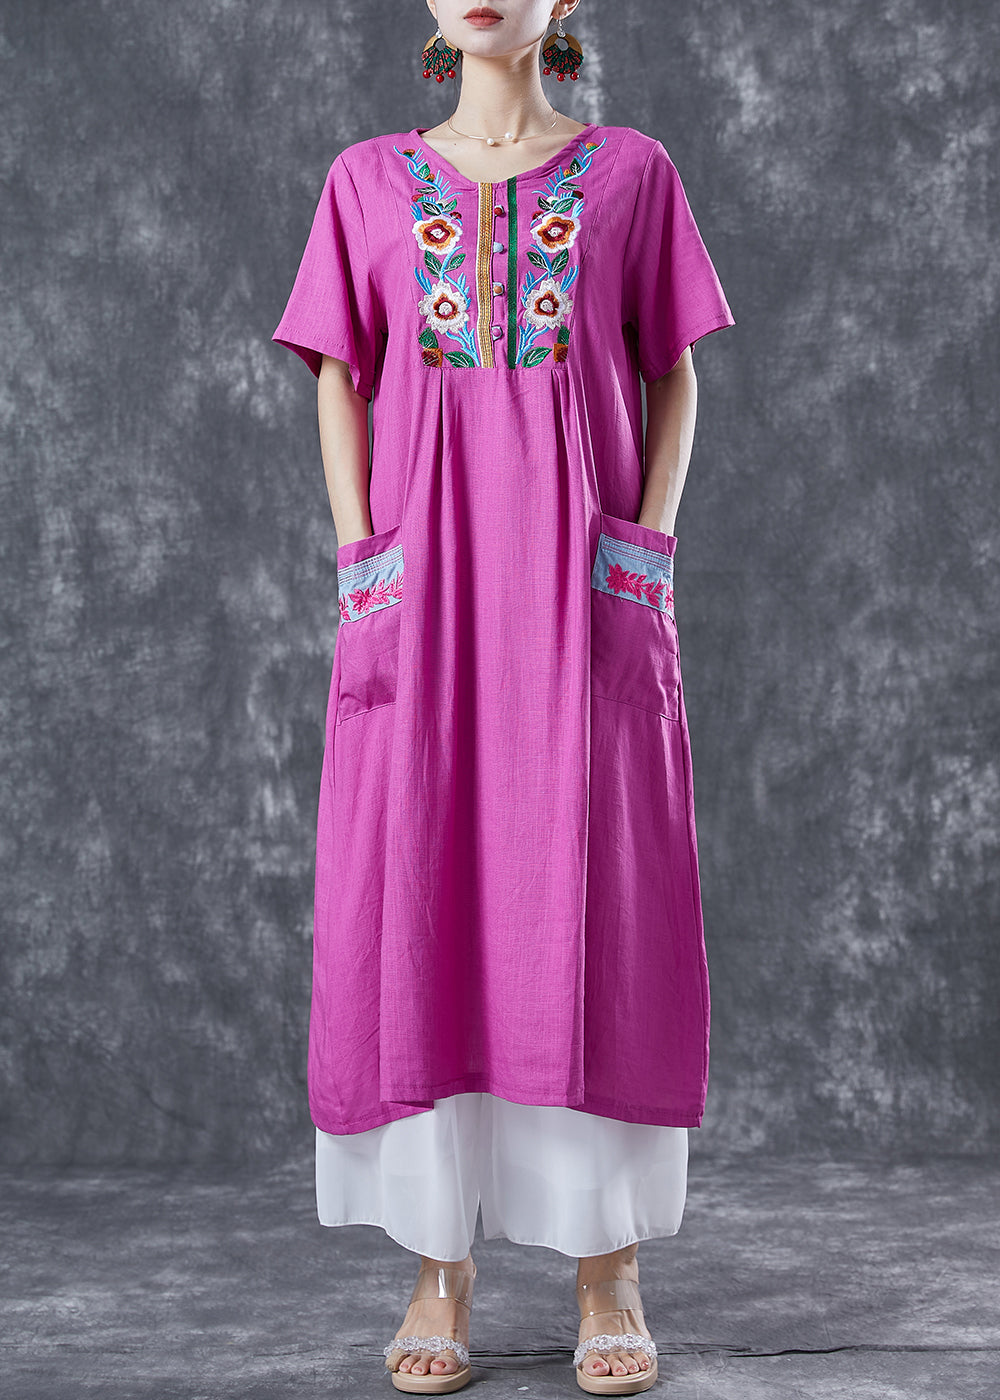 Unique Rose Embroideried Pockets Linen Holiday Dress Summer LY5630 - fabuloryshop